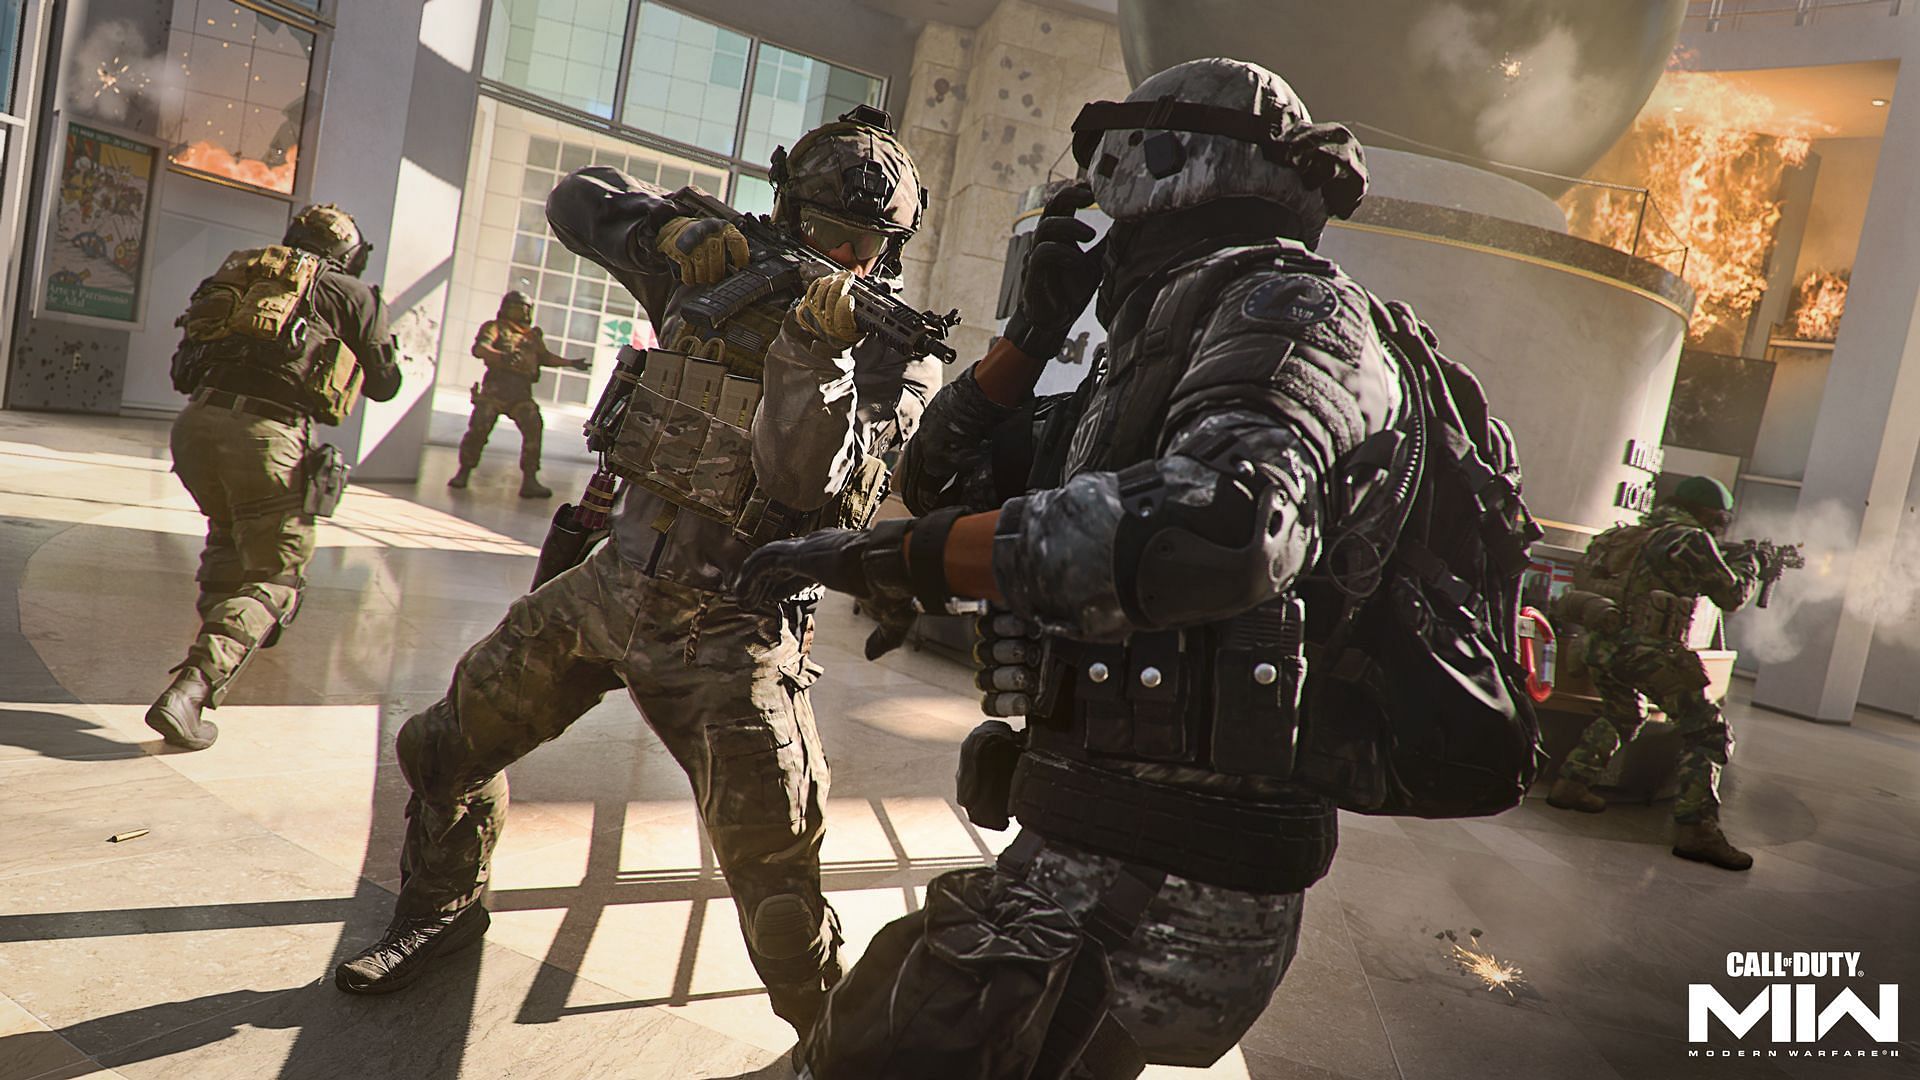 In-game image providing a look into the combat of Modern Warfare 2 multiplayer (Image via Activision)